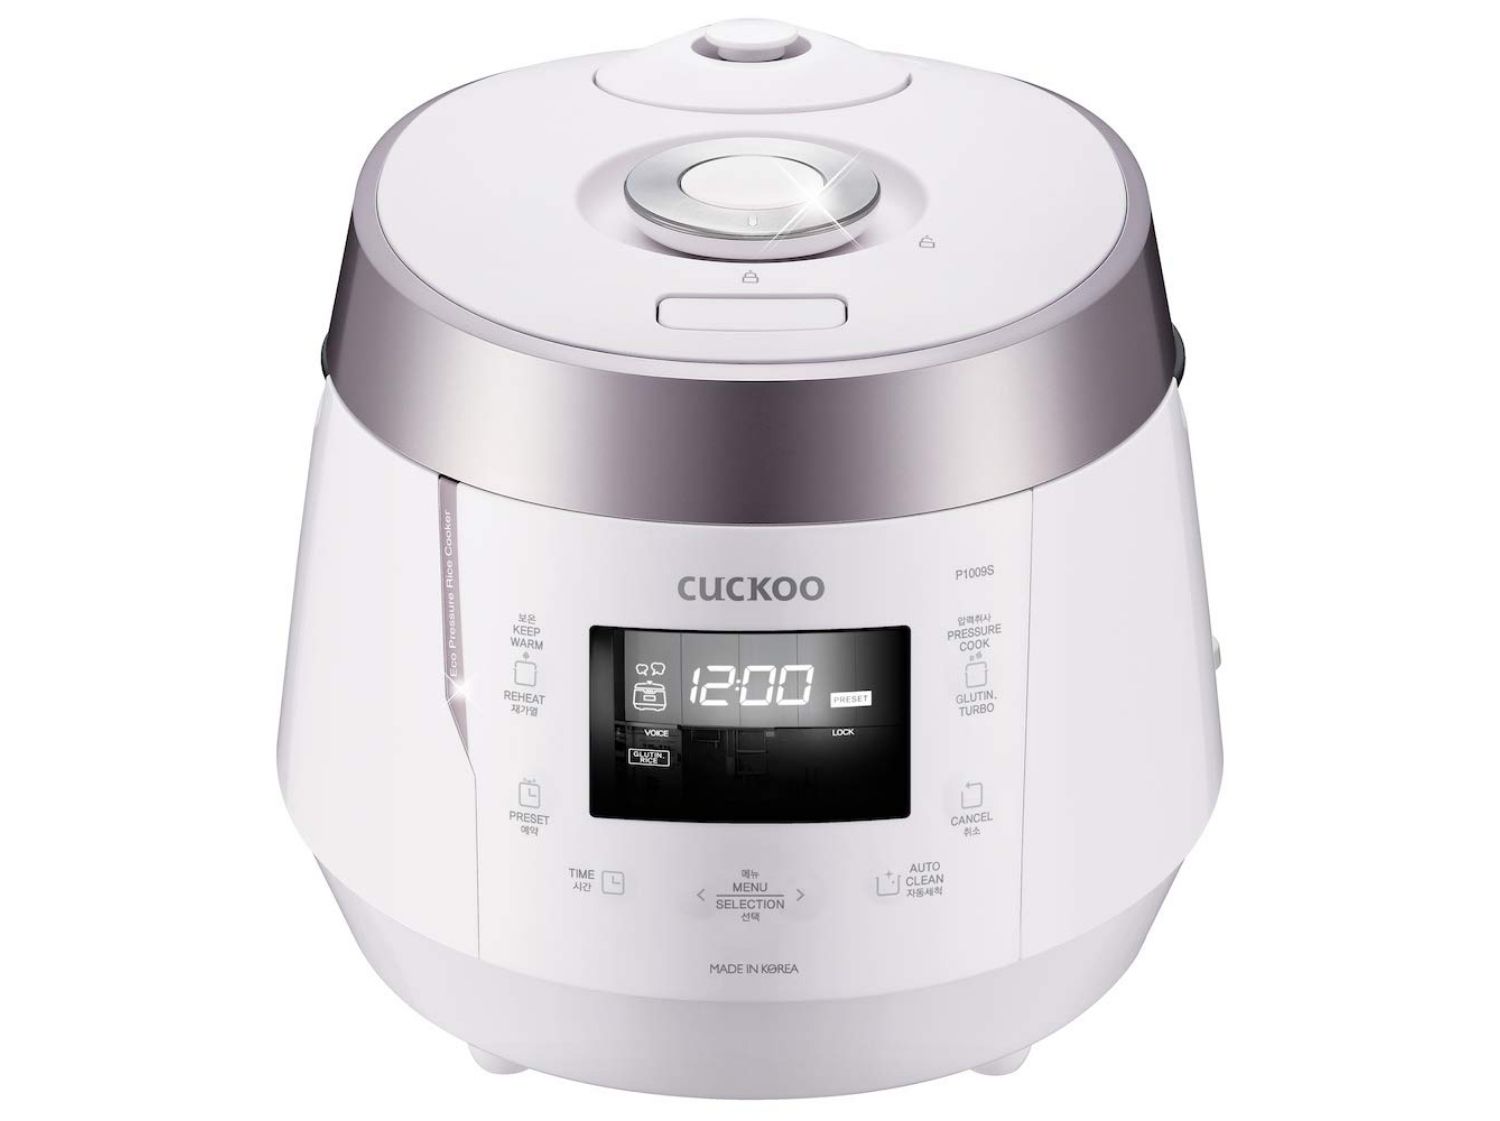 How To Use A Cuckoo Rice Cooker